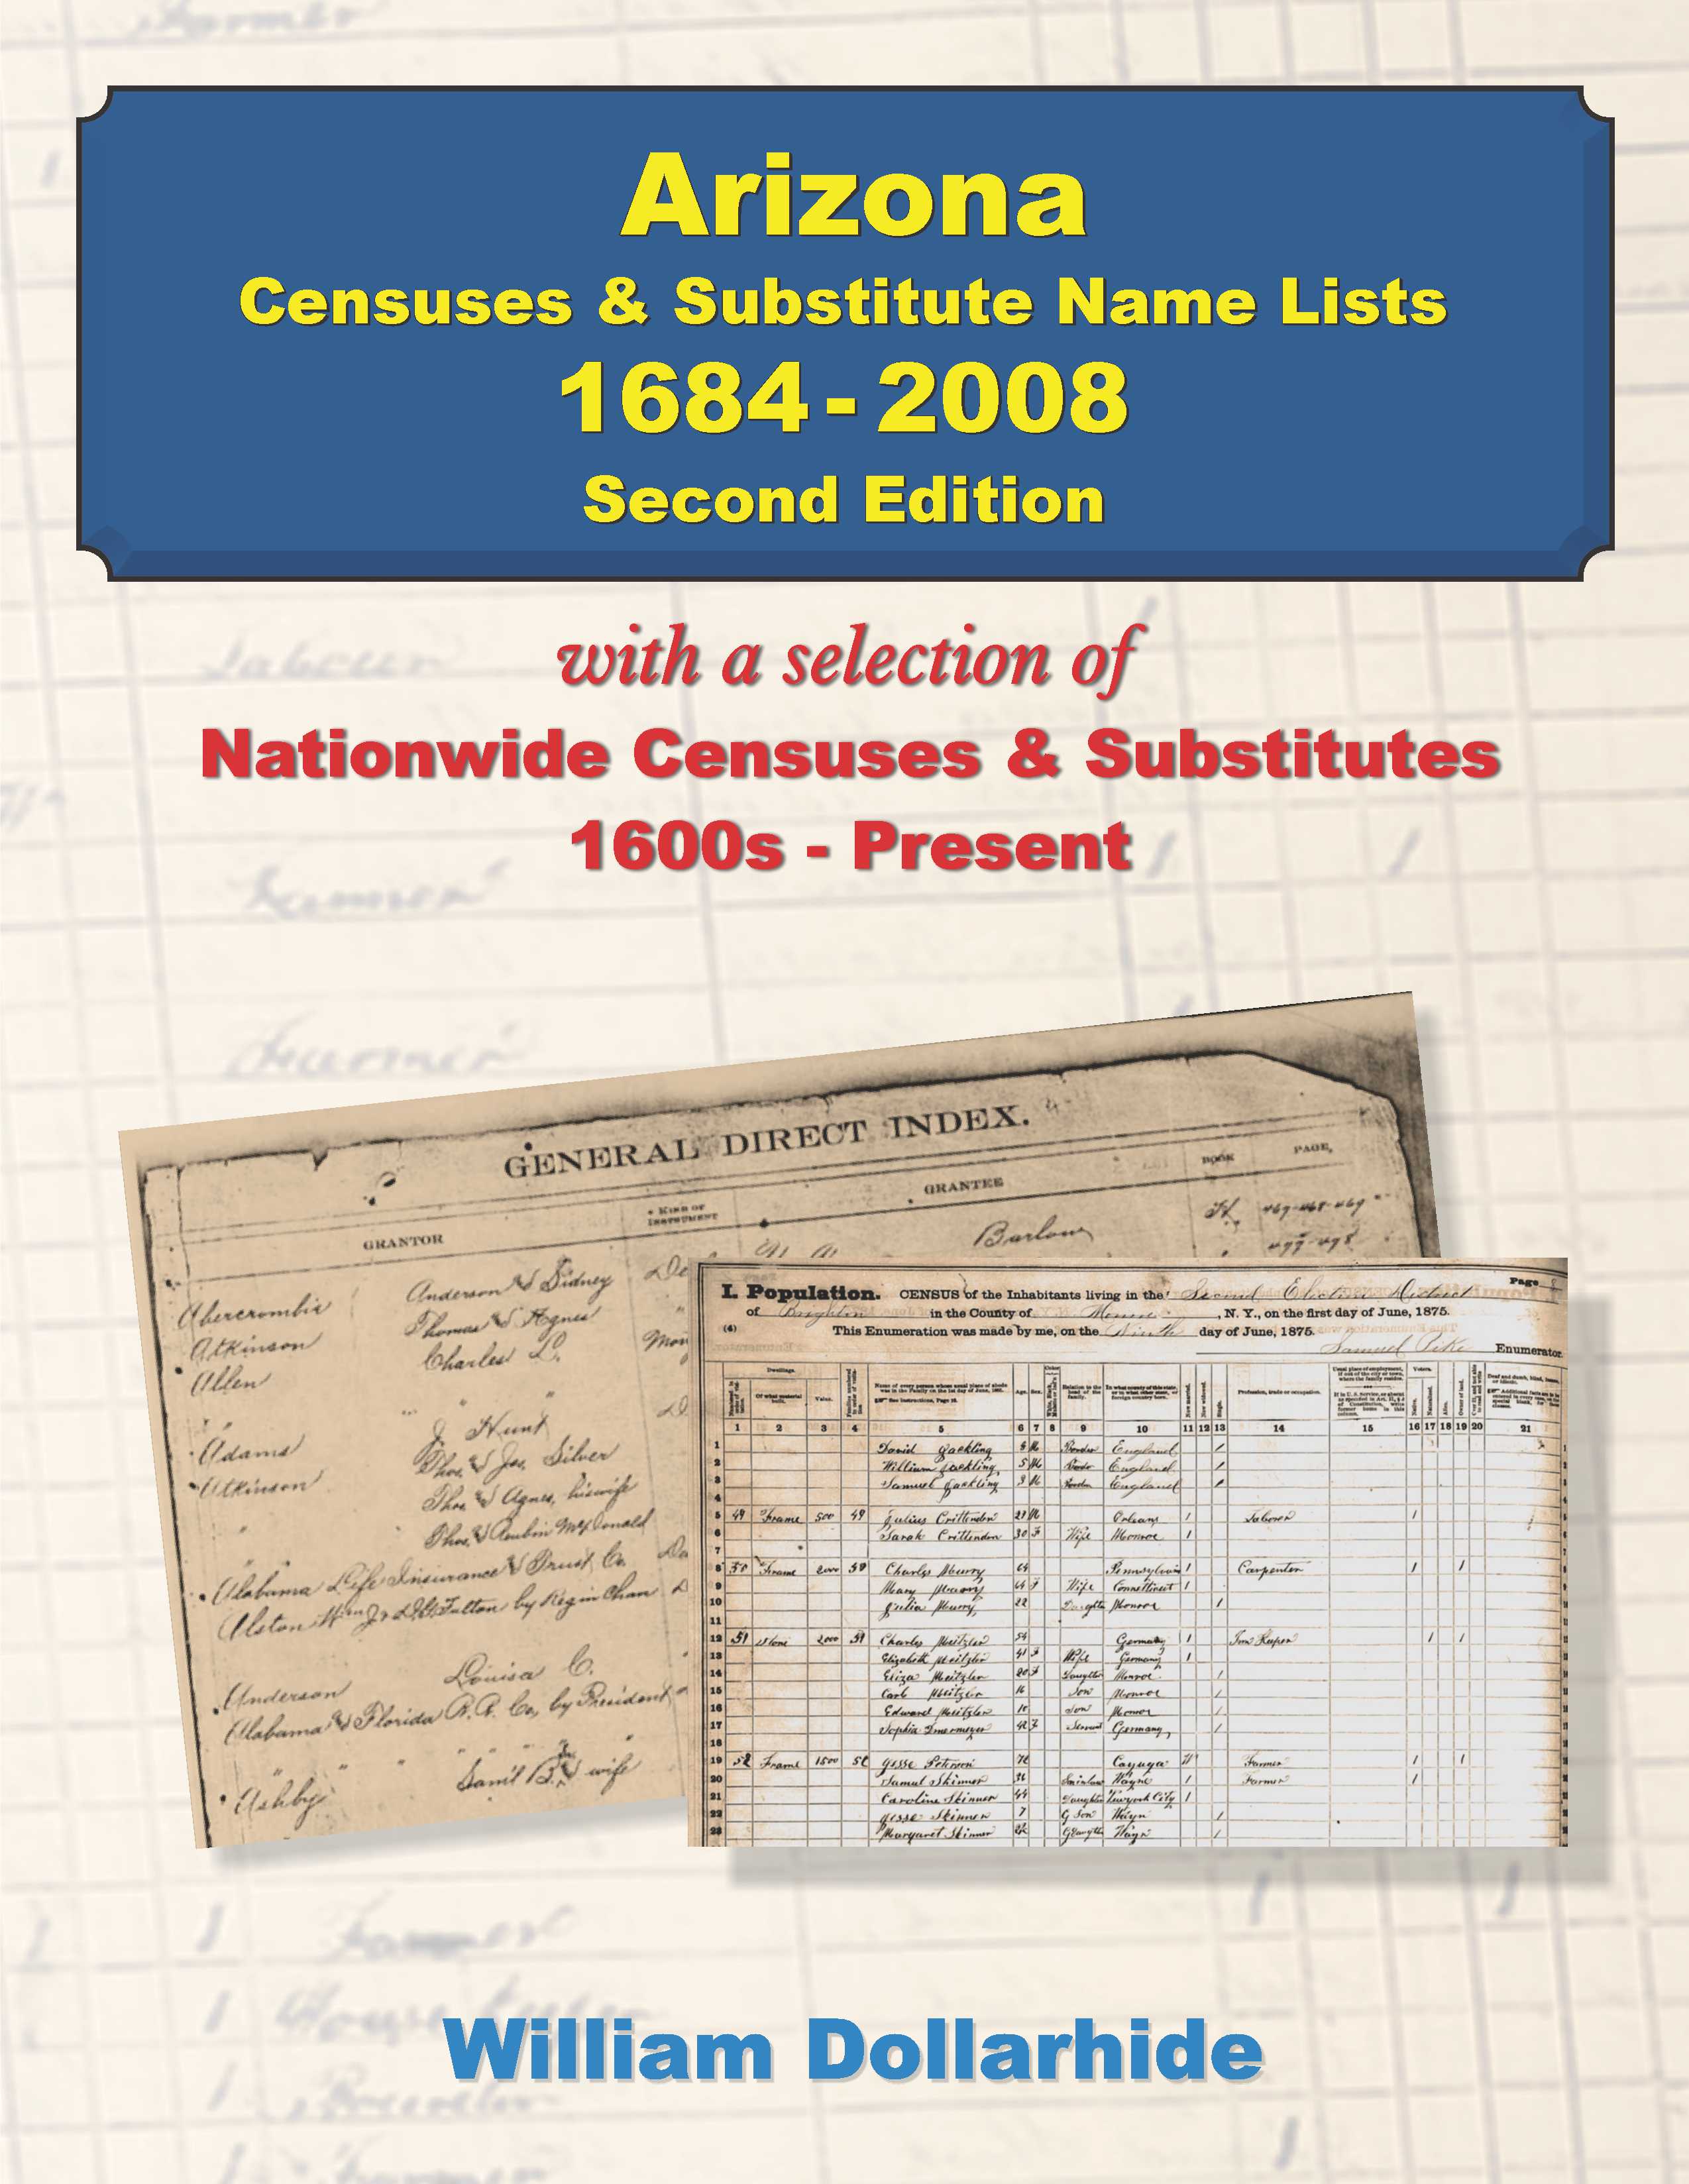 Arizona Censuses & Substitute Name Lists, 1684-2008 – Second Edition - SOFTBOUND